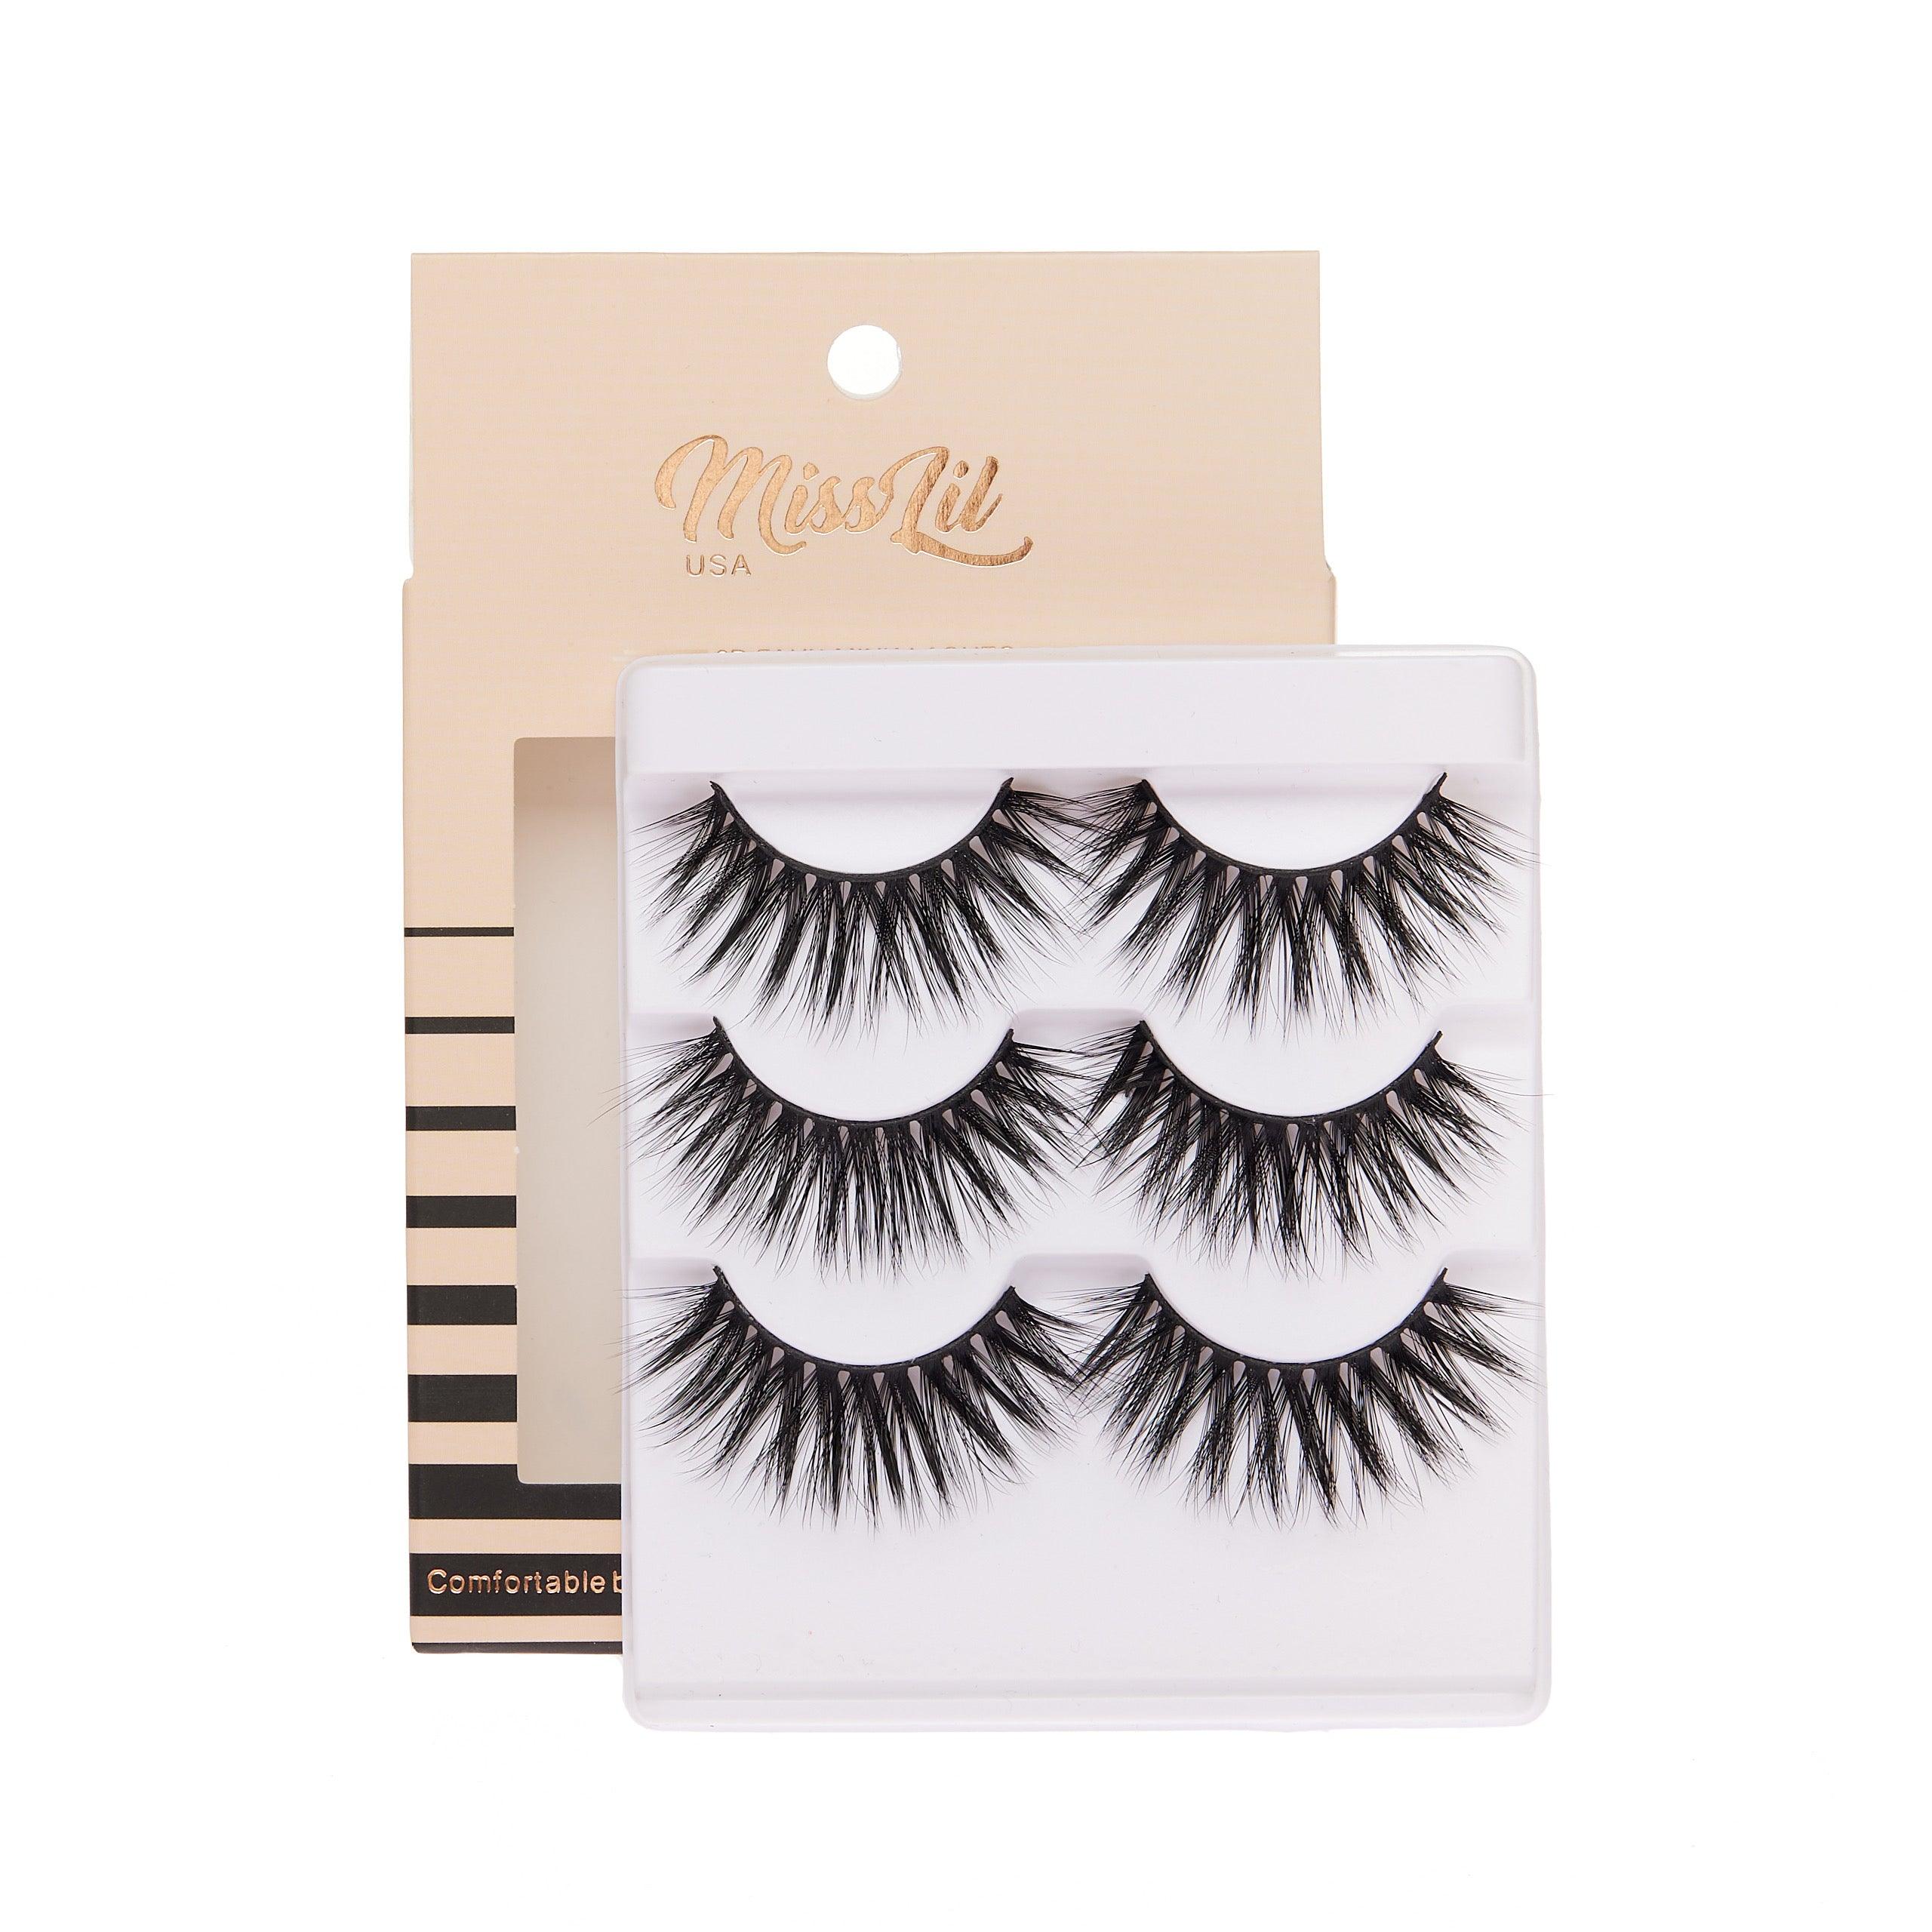 3-Pair Faux 9D Mink Eyelashes - Luxury Collection #11 - Pack of 3 - Miss Lil USA